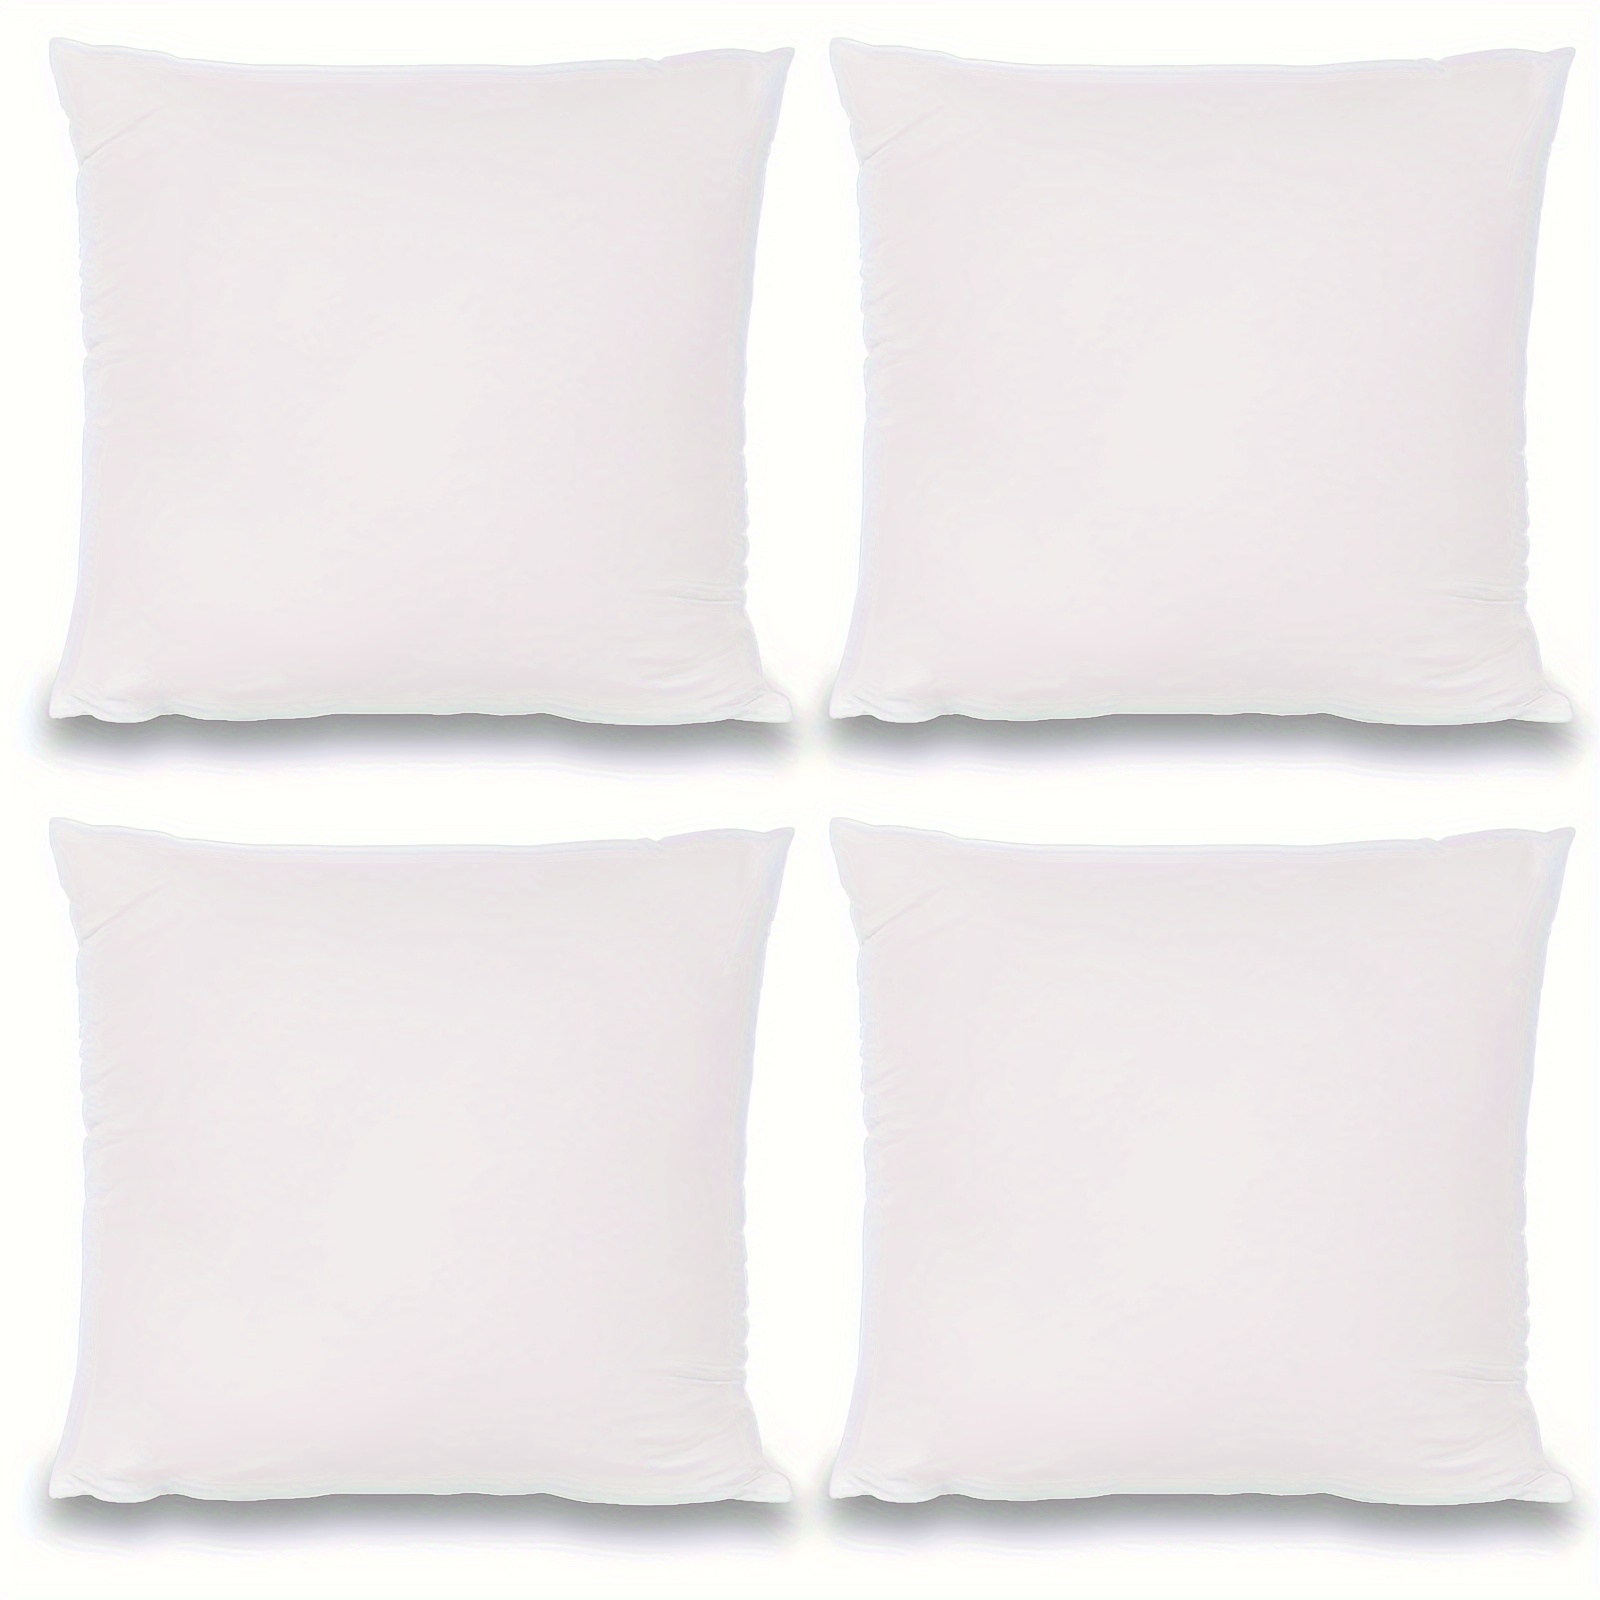 Throw Pillow Inserts Set of Insert White Forms Soft Microfiber 2